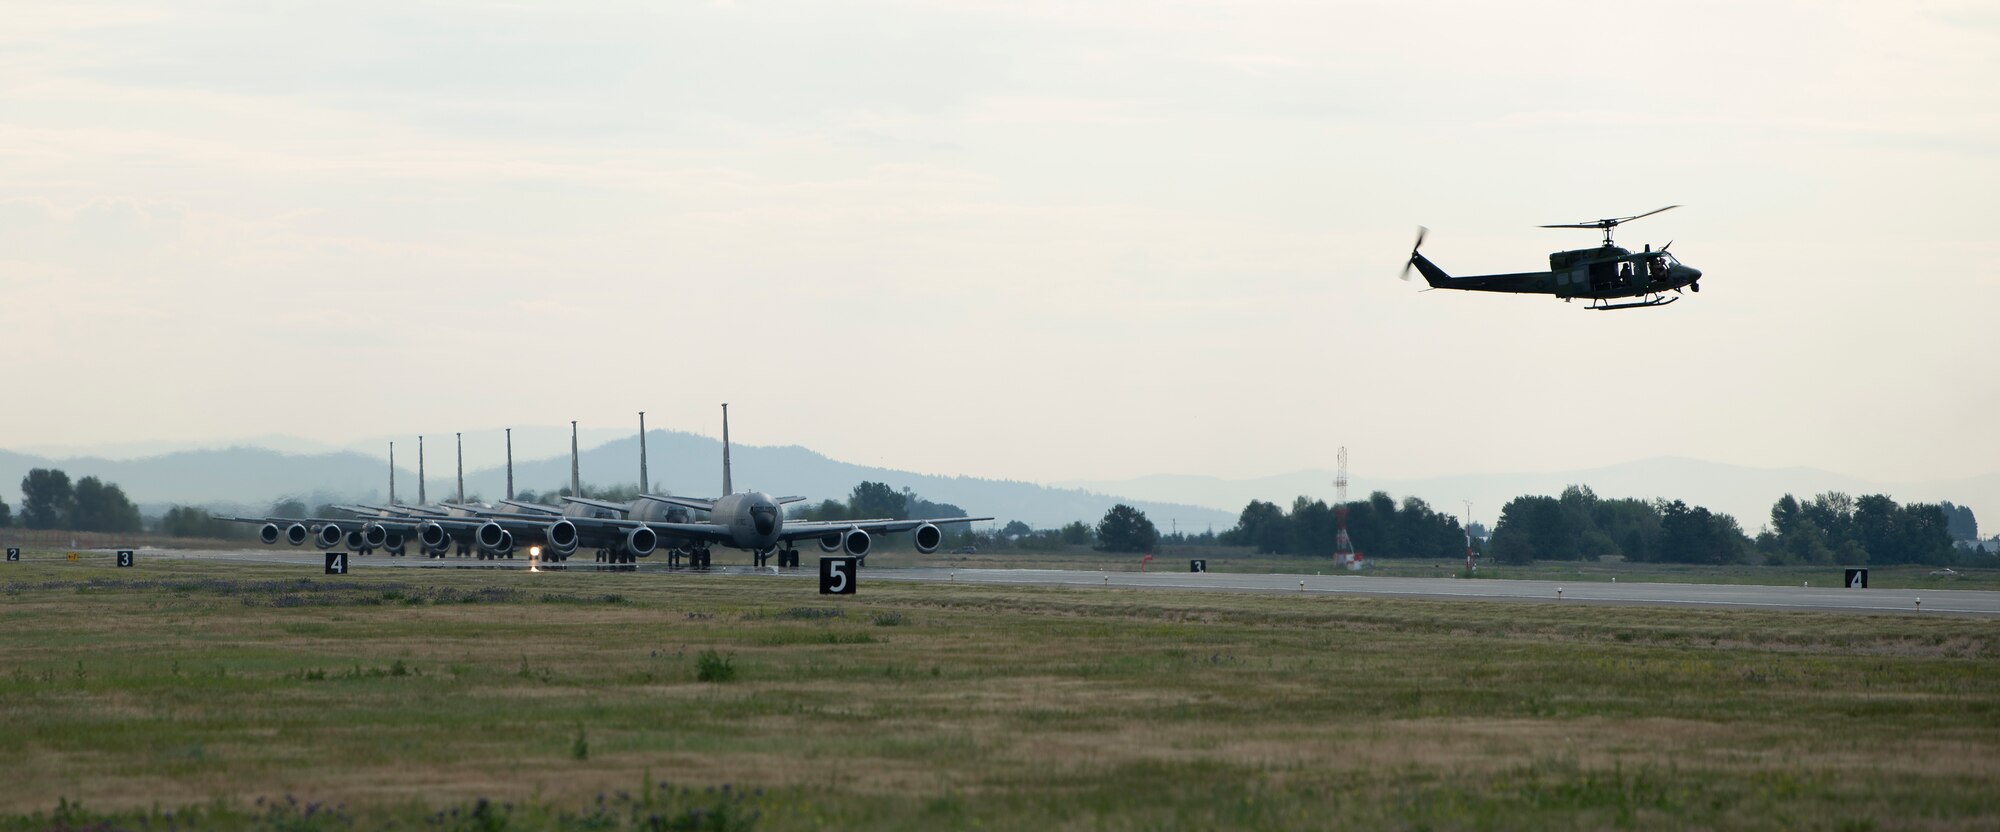 KC-135 Stratotankers assigned to the 92nd Air Refueling Wing and 141st Air Refueling Wing taxi into position before takeoff as part of Operation Centennial Contact at Fairchild Air force Base, Washington, June 27, 2023. The movement, which included stops at Yellowstone National Park, Mount Rushmore and Glacier National Park, was part of Air Mobility Command’s celebration of 100 years air refueling operations and demonstrated the 92nd Air Refueling Wing’s global reach capabilities. Since its inception in 1923, Air refueling has become a crucial component of military and civilian aviation operations around the world by extending the range and endurance of aircraft and enabling them to complete missions that would otherwise be impossible or require multiple stops. As a result, this capability is essential for strategic and tactical operations, as well as humanitarian relief efforts in support of AMC, U.S. Transportation Command and Department of Defense priorities. (U.S. Air Force photo by Tech. Sgt. Michael Brown)